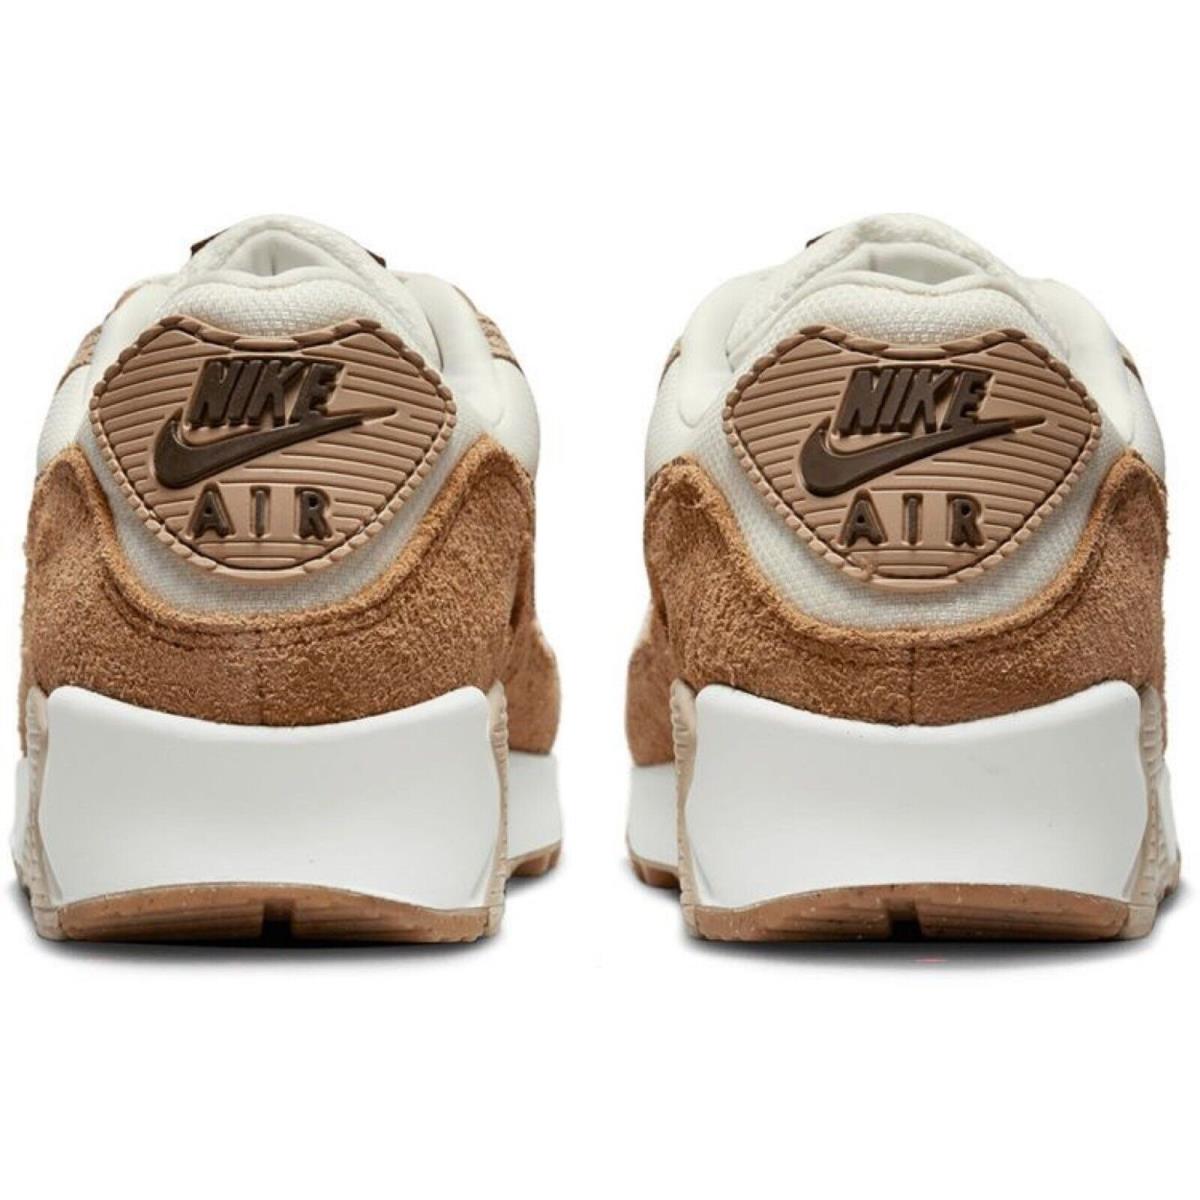 Nike shoes Air Max - Brown , White/red Manufacturer 20